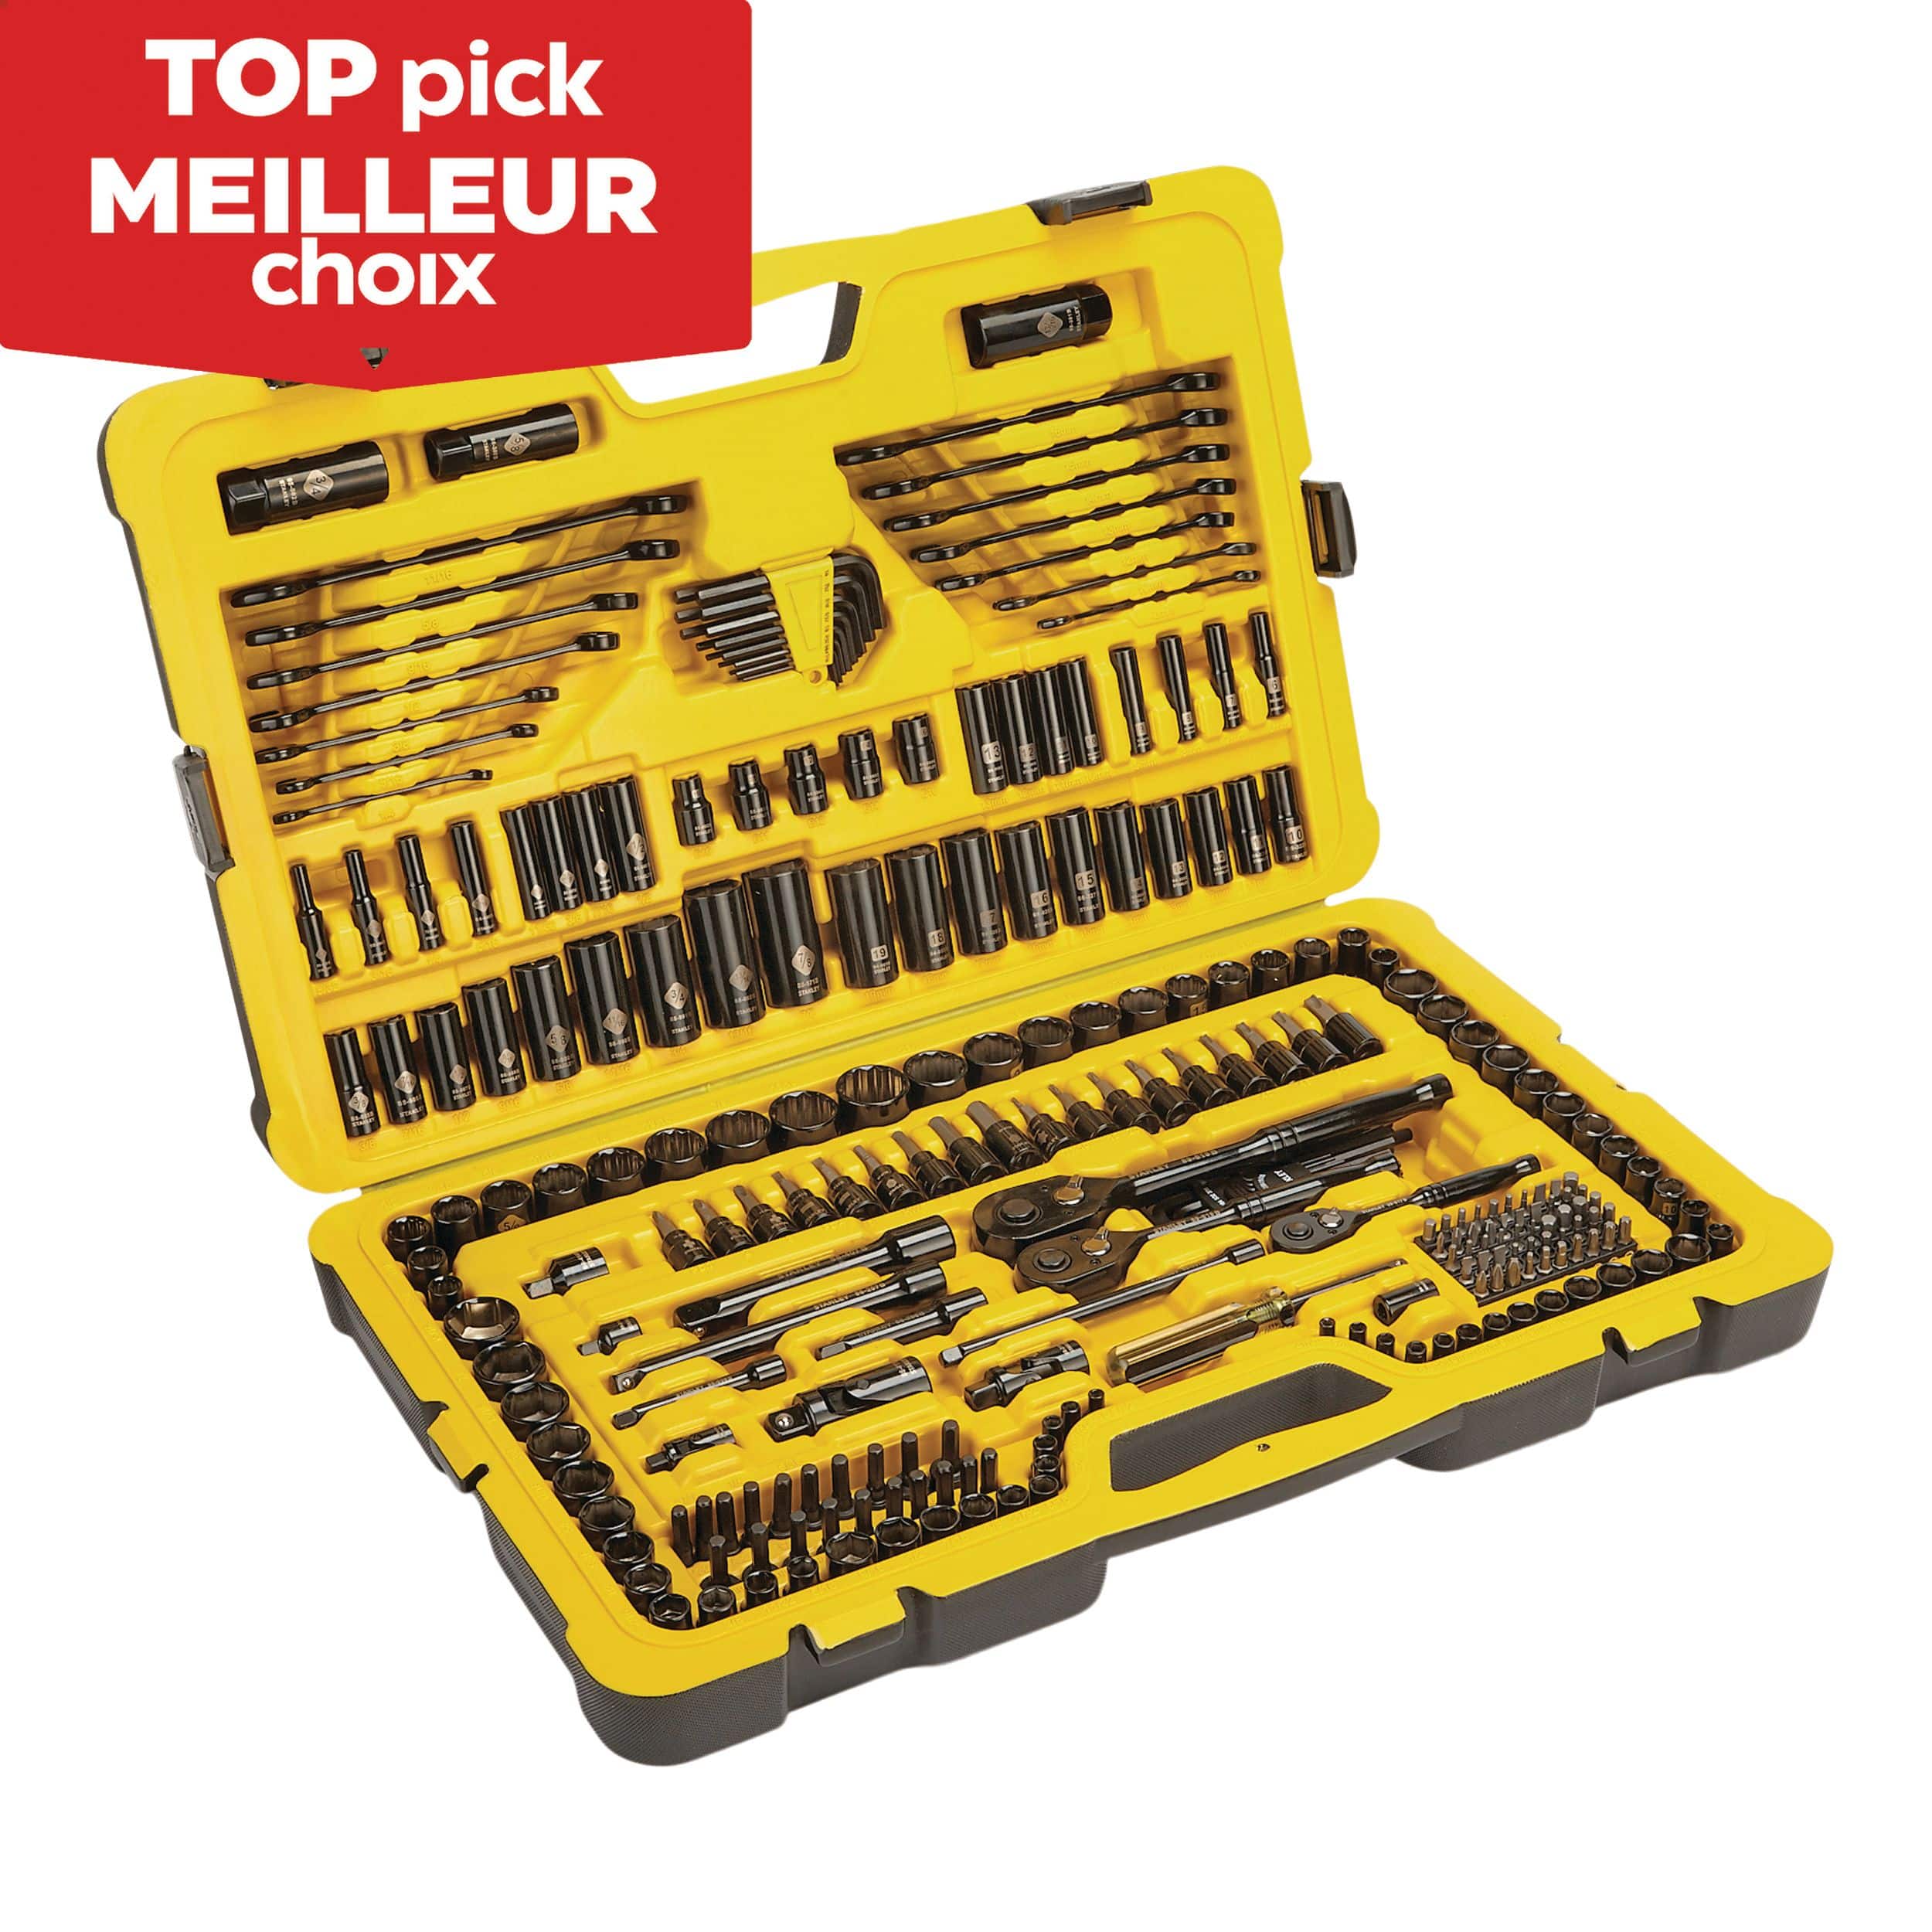 https://media-www.canadiantire.ca/product/fixing/tools/sockets-wrenches/0580275/stanley-274-piece-black-chrome-socket-set-8f155108-2432-4744-8bd5-da34ae9f35bb-jpgrendition.jpg